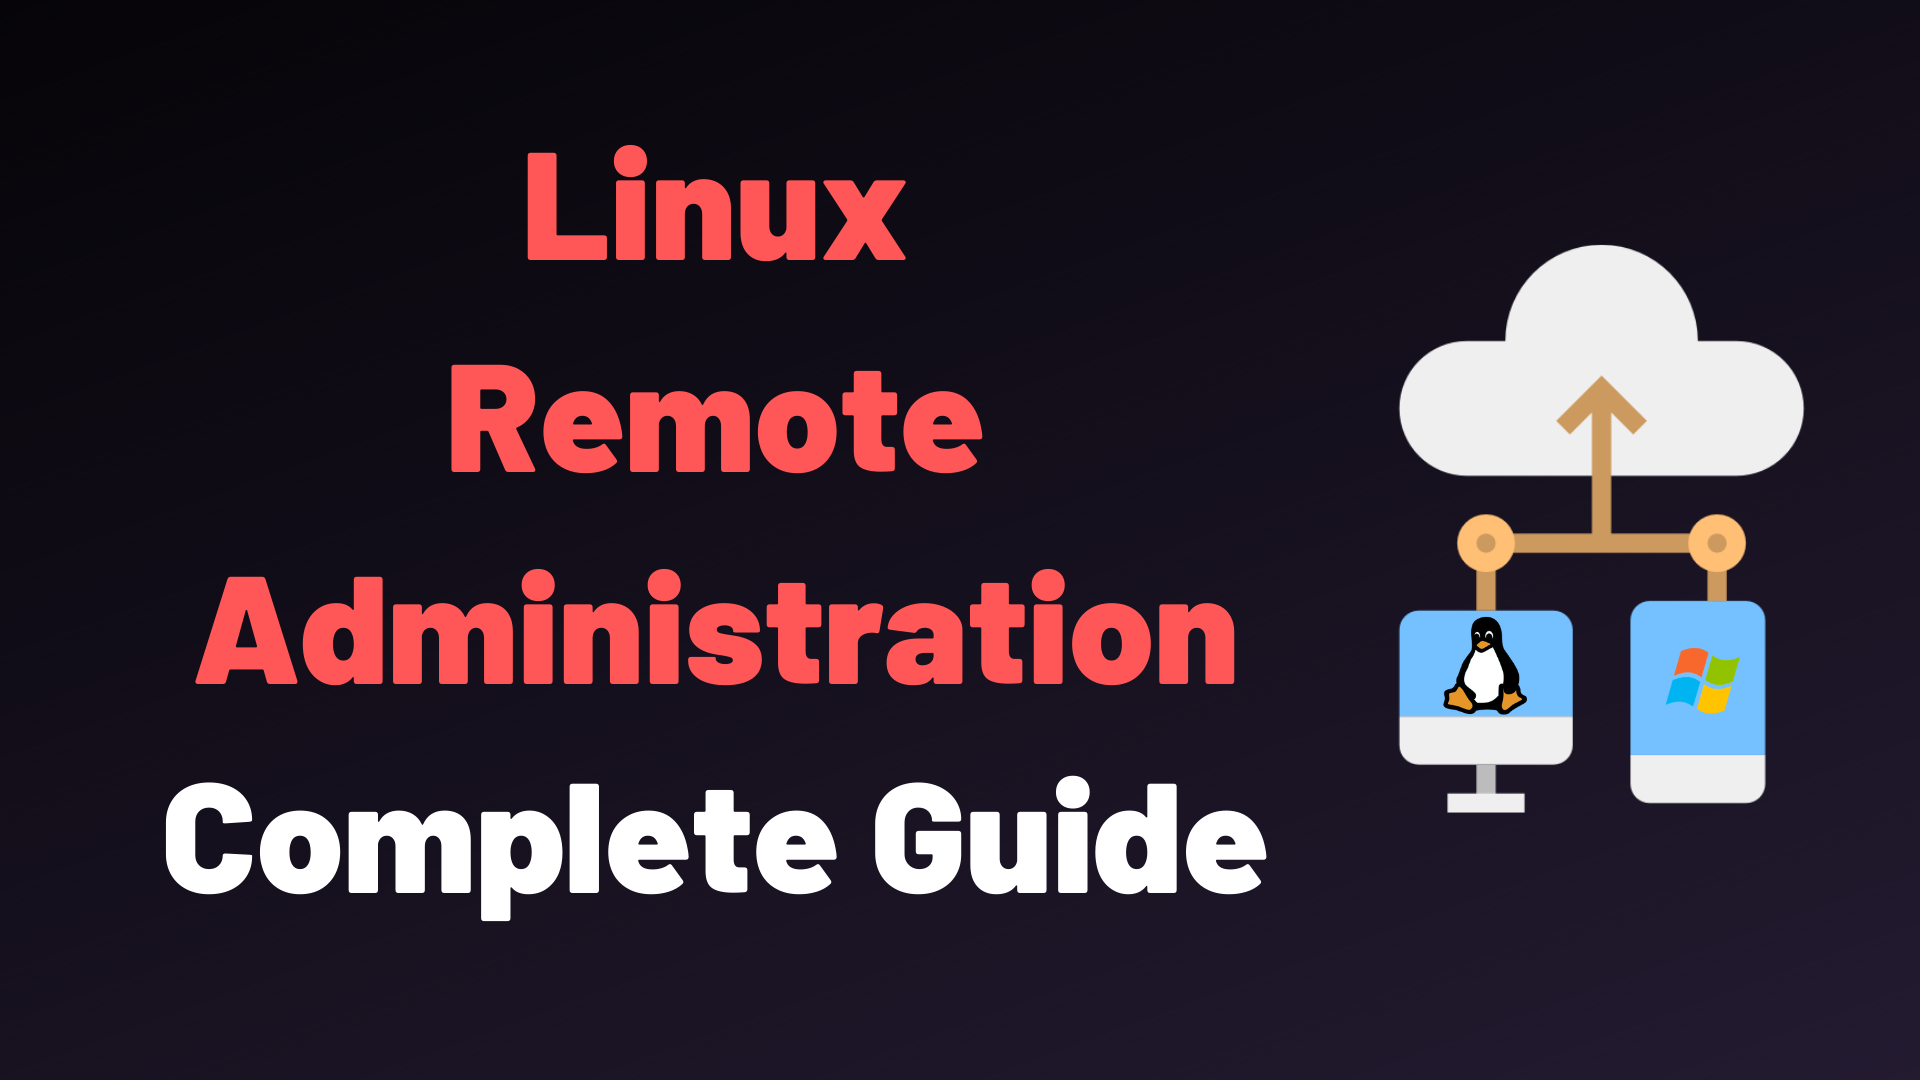 Working Remotely with Linux Systems